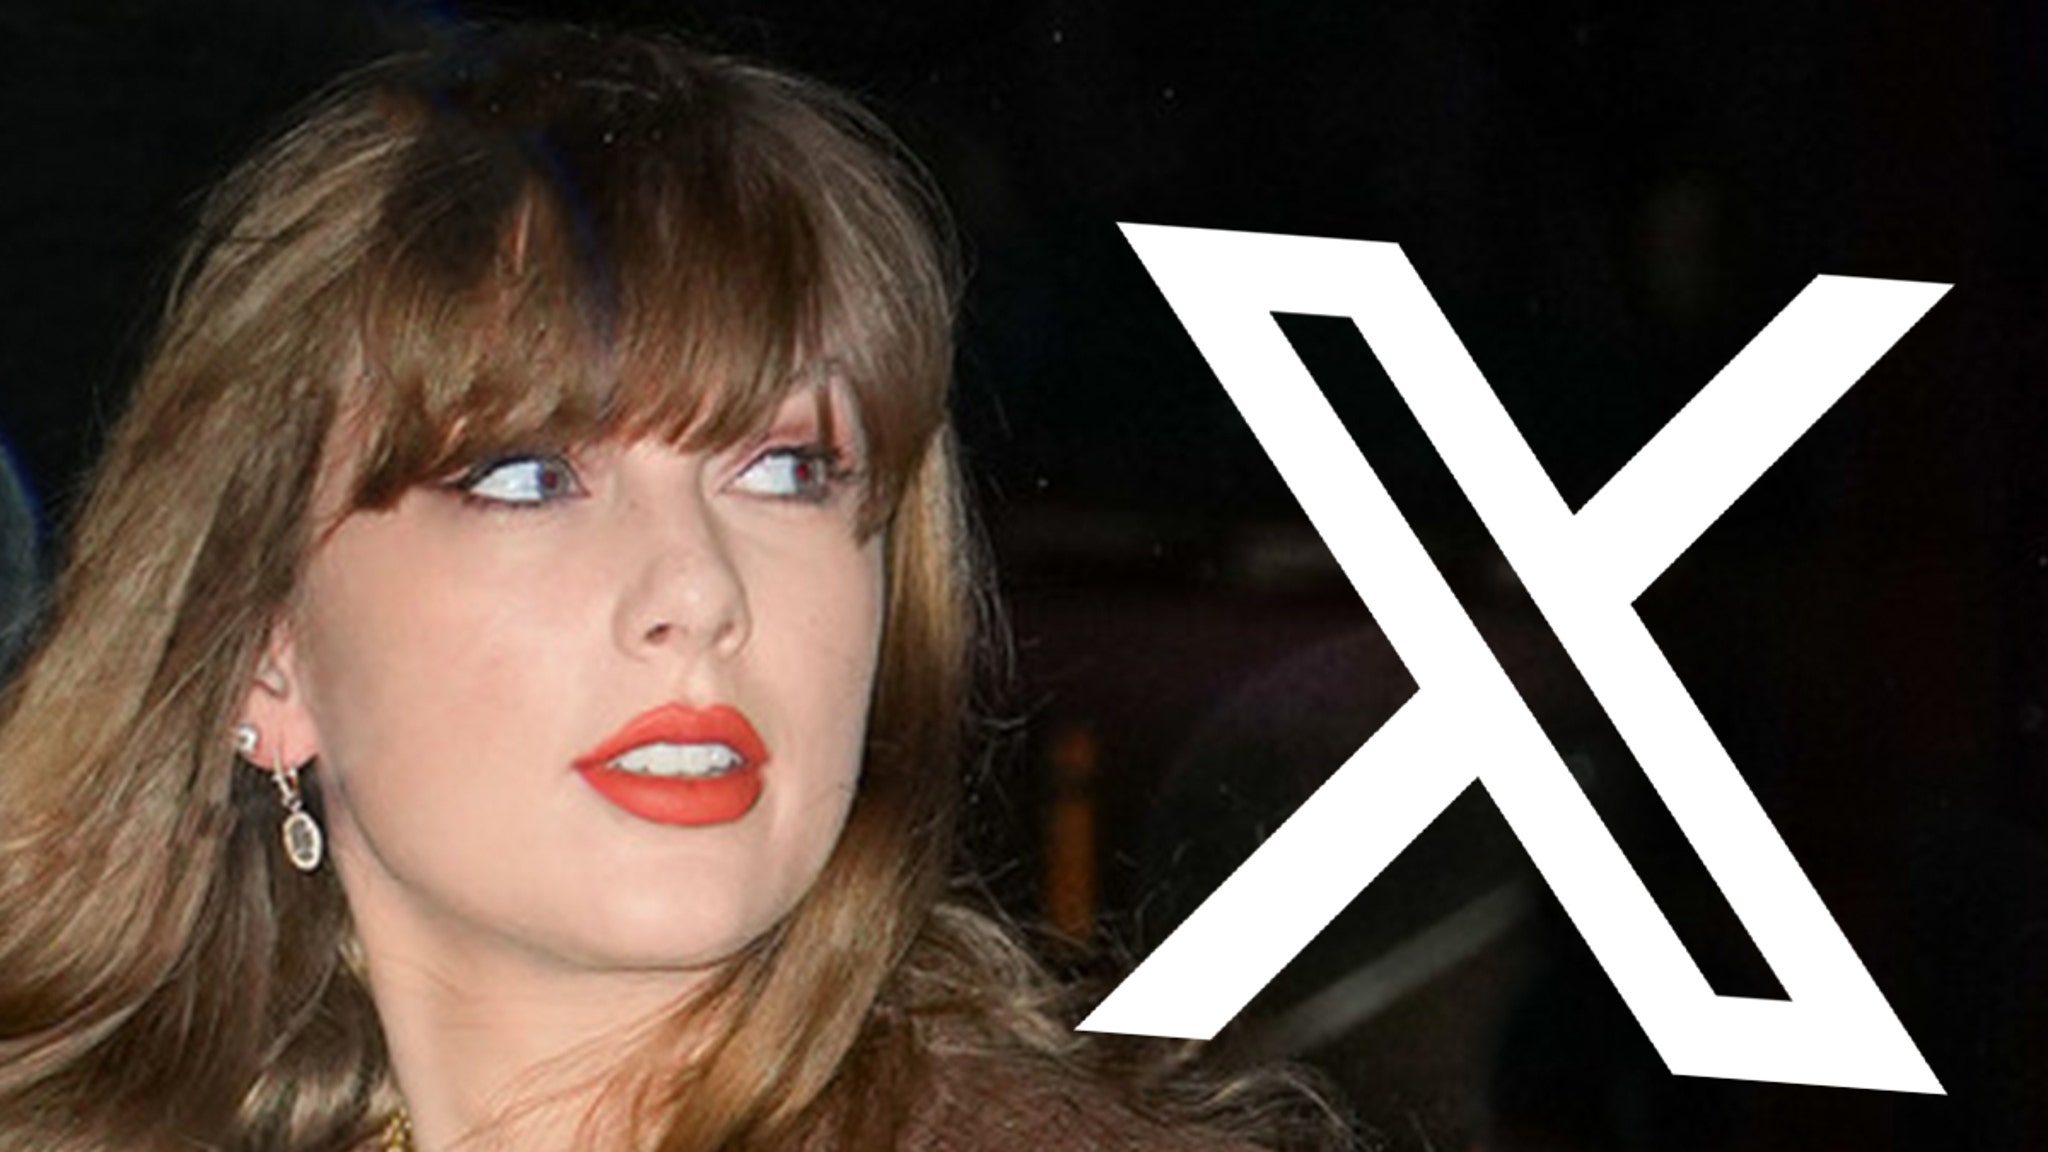 Taylor Swift cannot be searched on X due to AI image issues